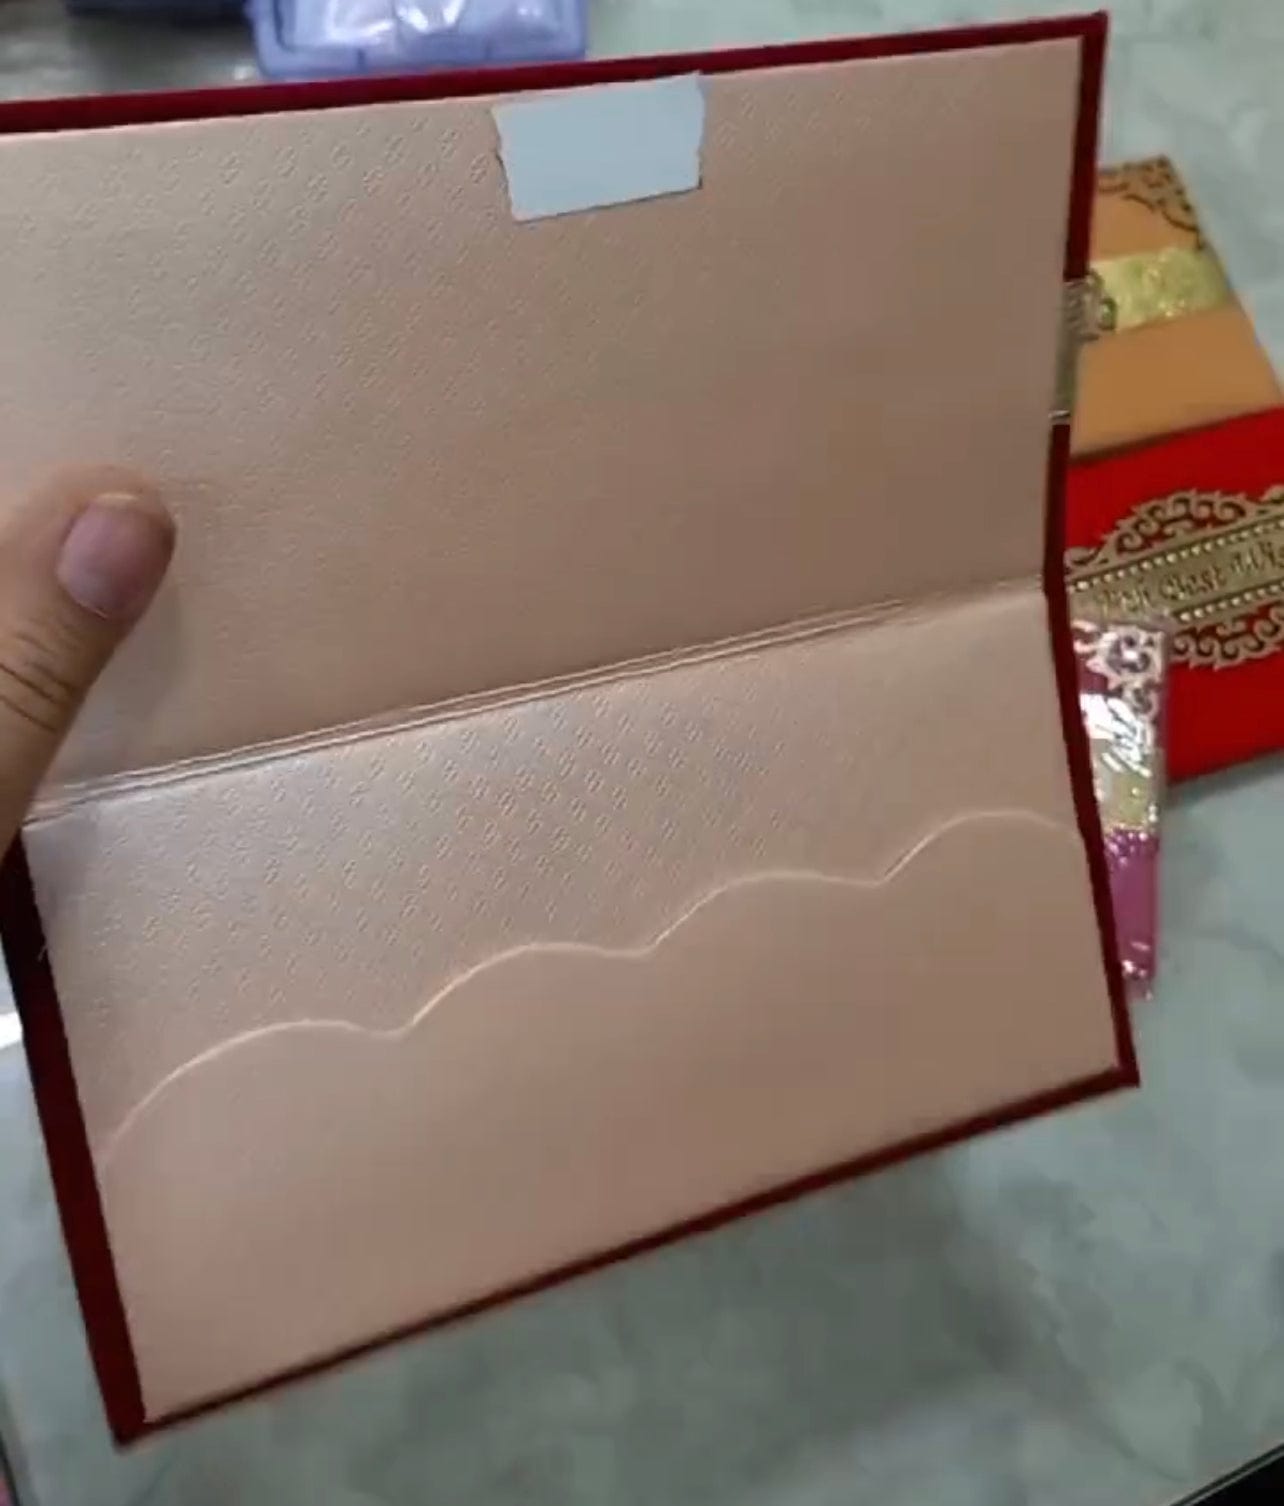 70 Rs each on buying 50+ pcs / WhatsApp at 8619550223 to order Clutch Designer Velvet Best wishes Shagun envelopes for guests in weddings, pooja ceremony (video attached)